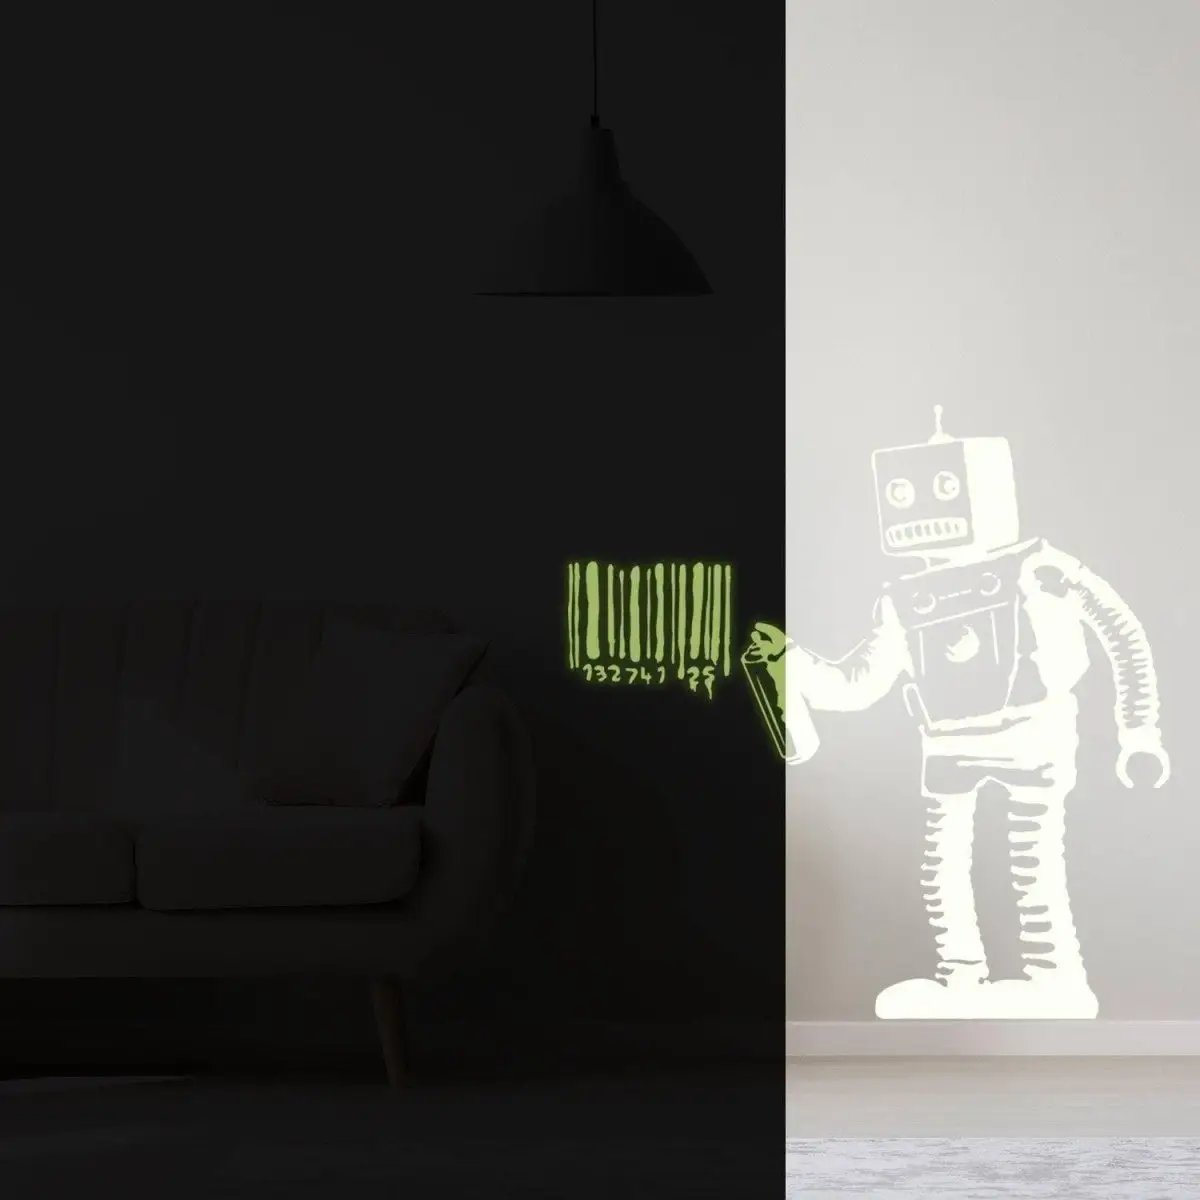 Luminescent Barcode Robot Glow In The Dark Wall Decal - Decords